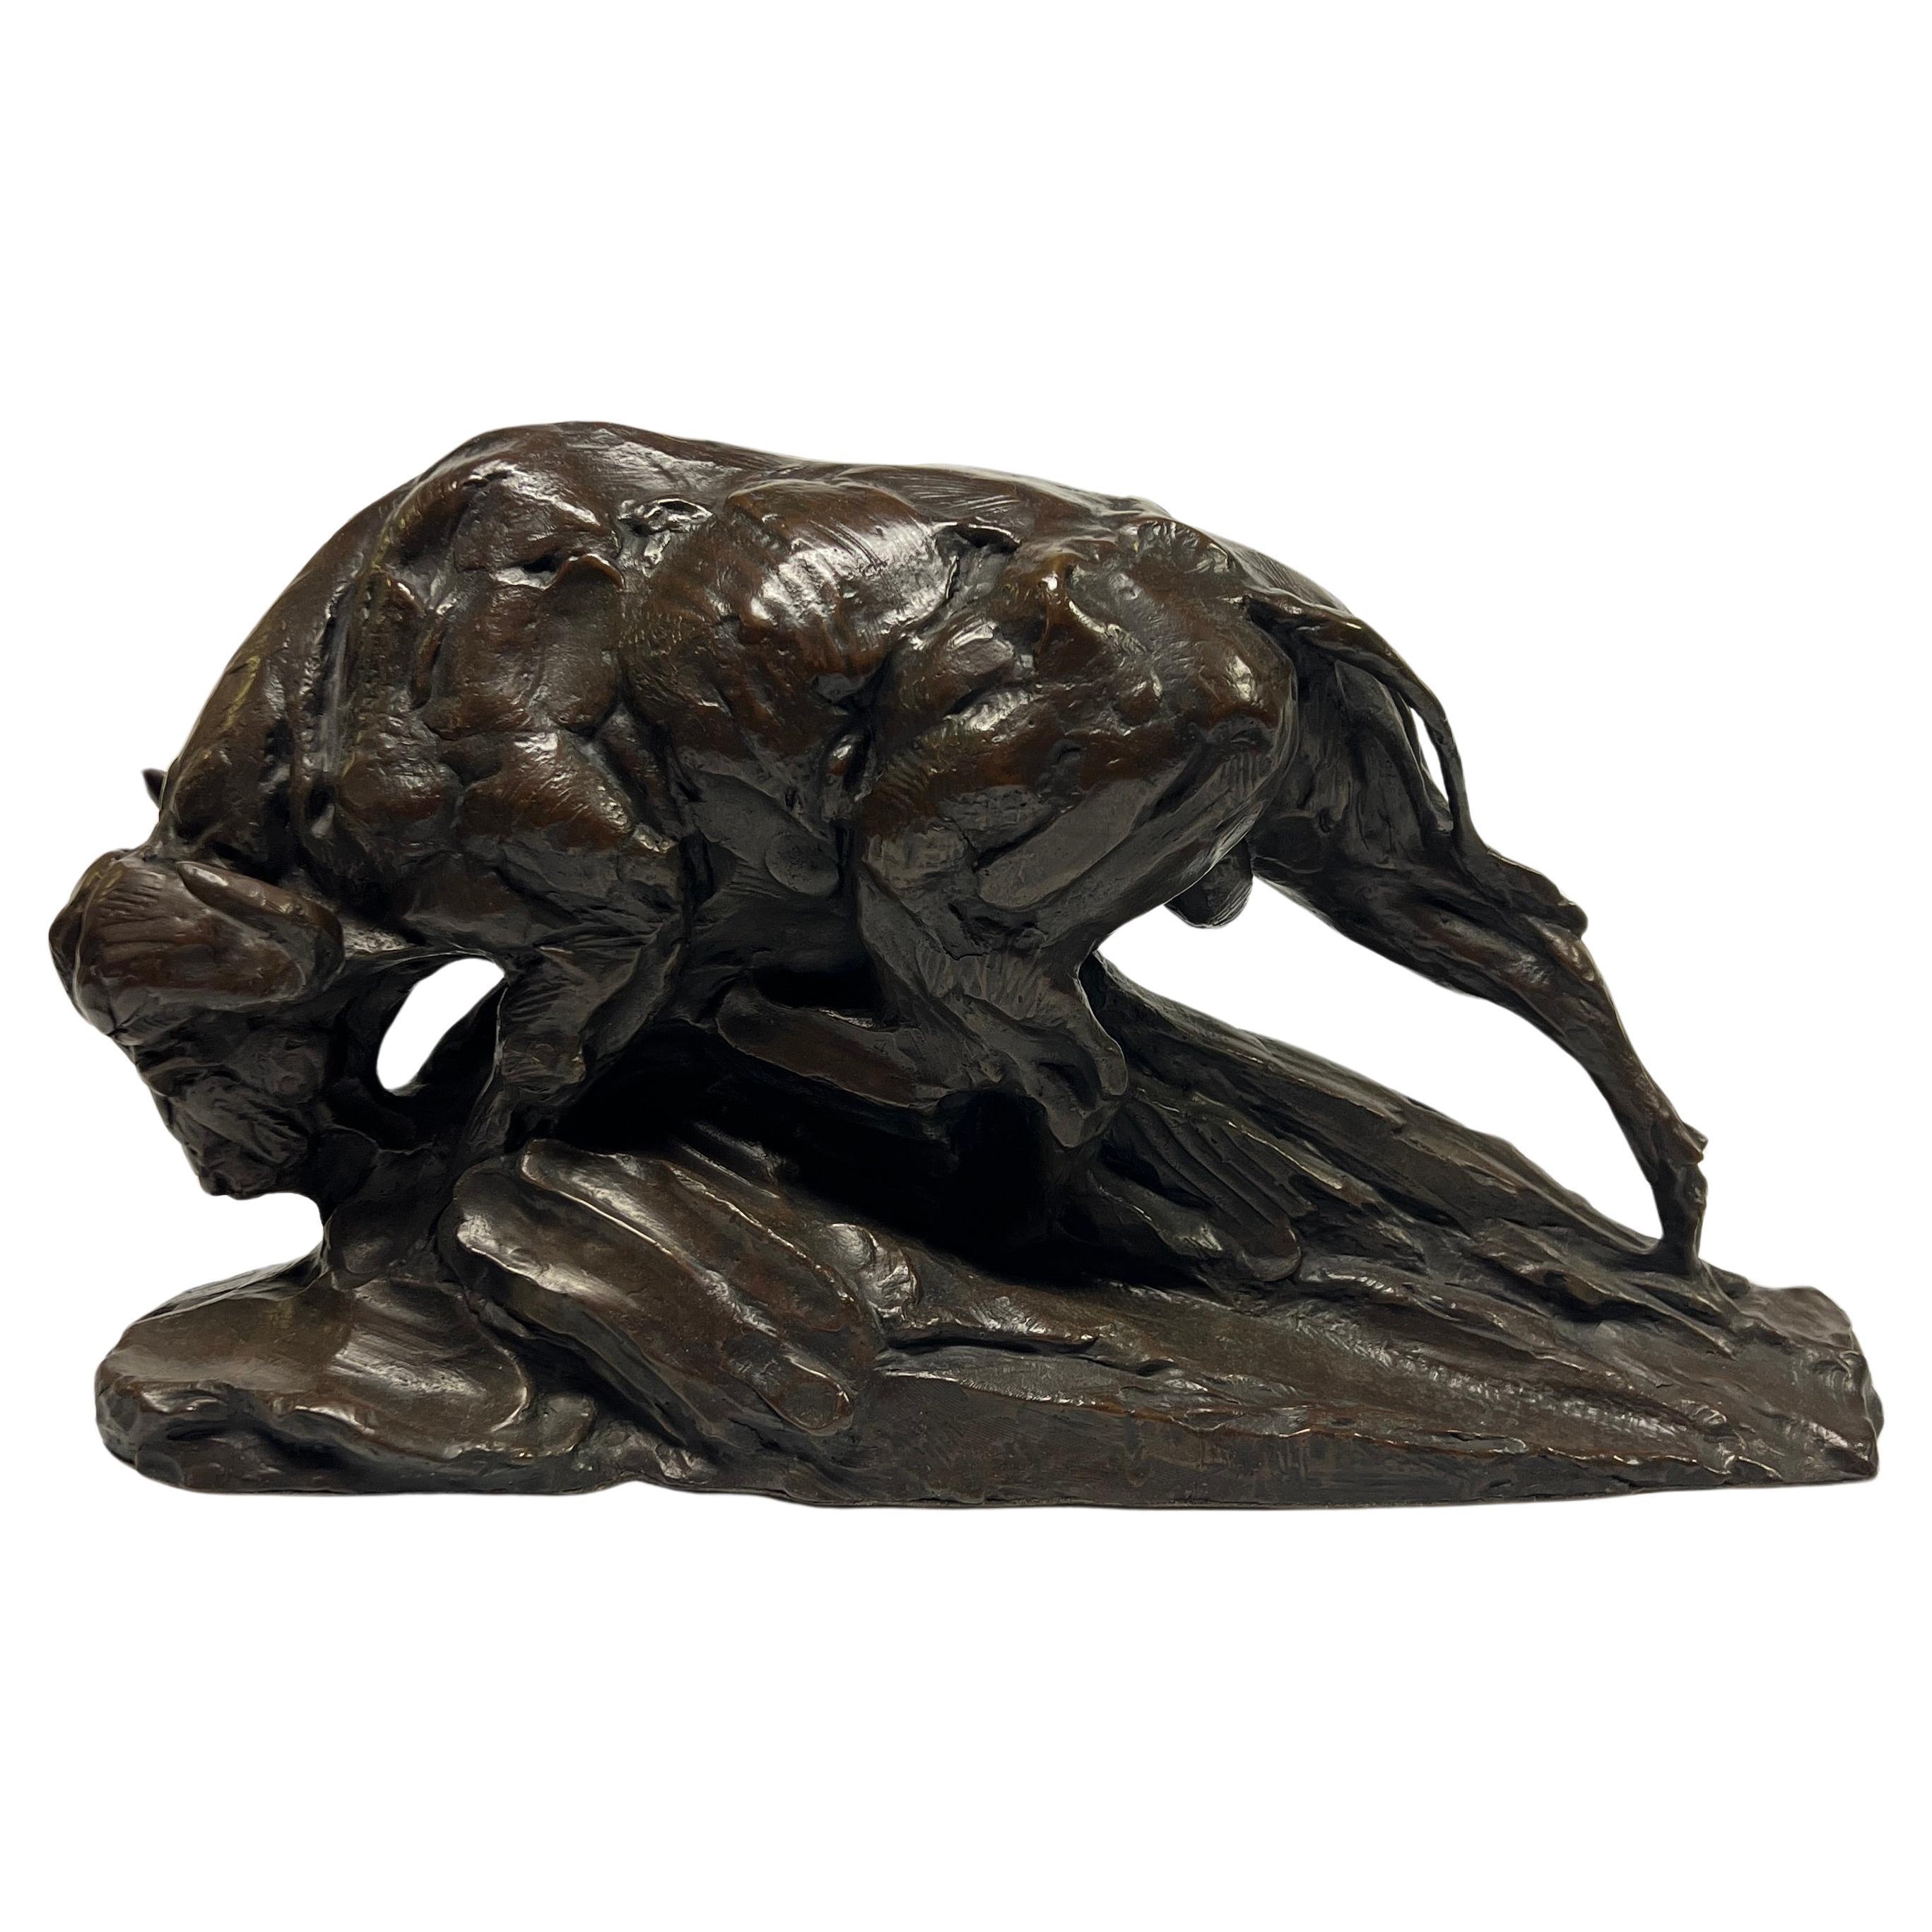 Water Buffalo Bronze Sculpture by Dylan Lewis (1964- )